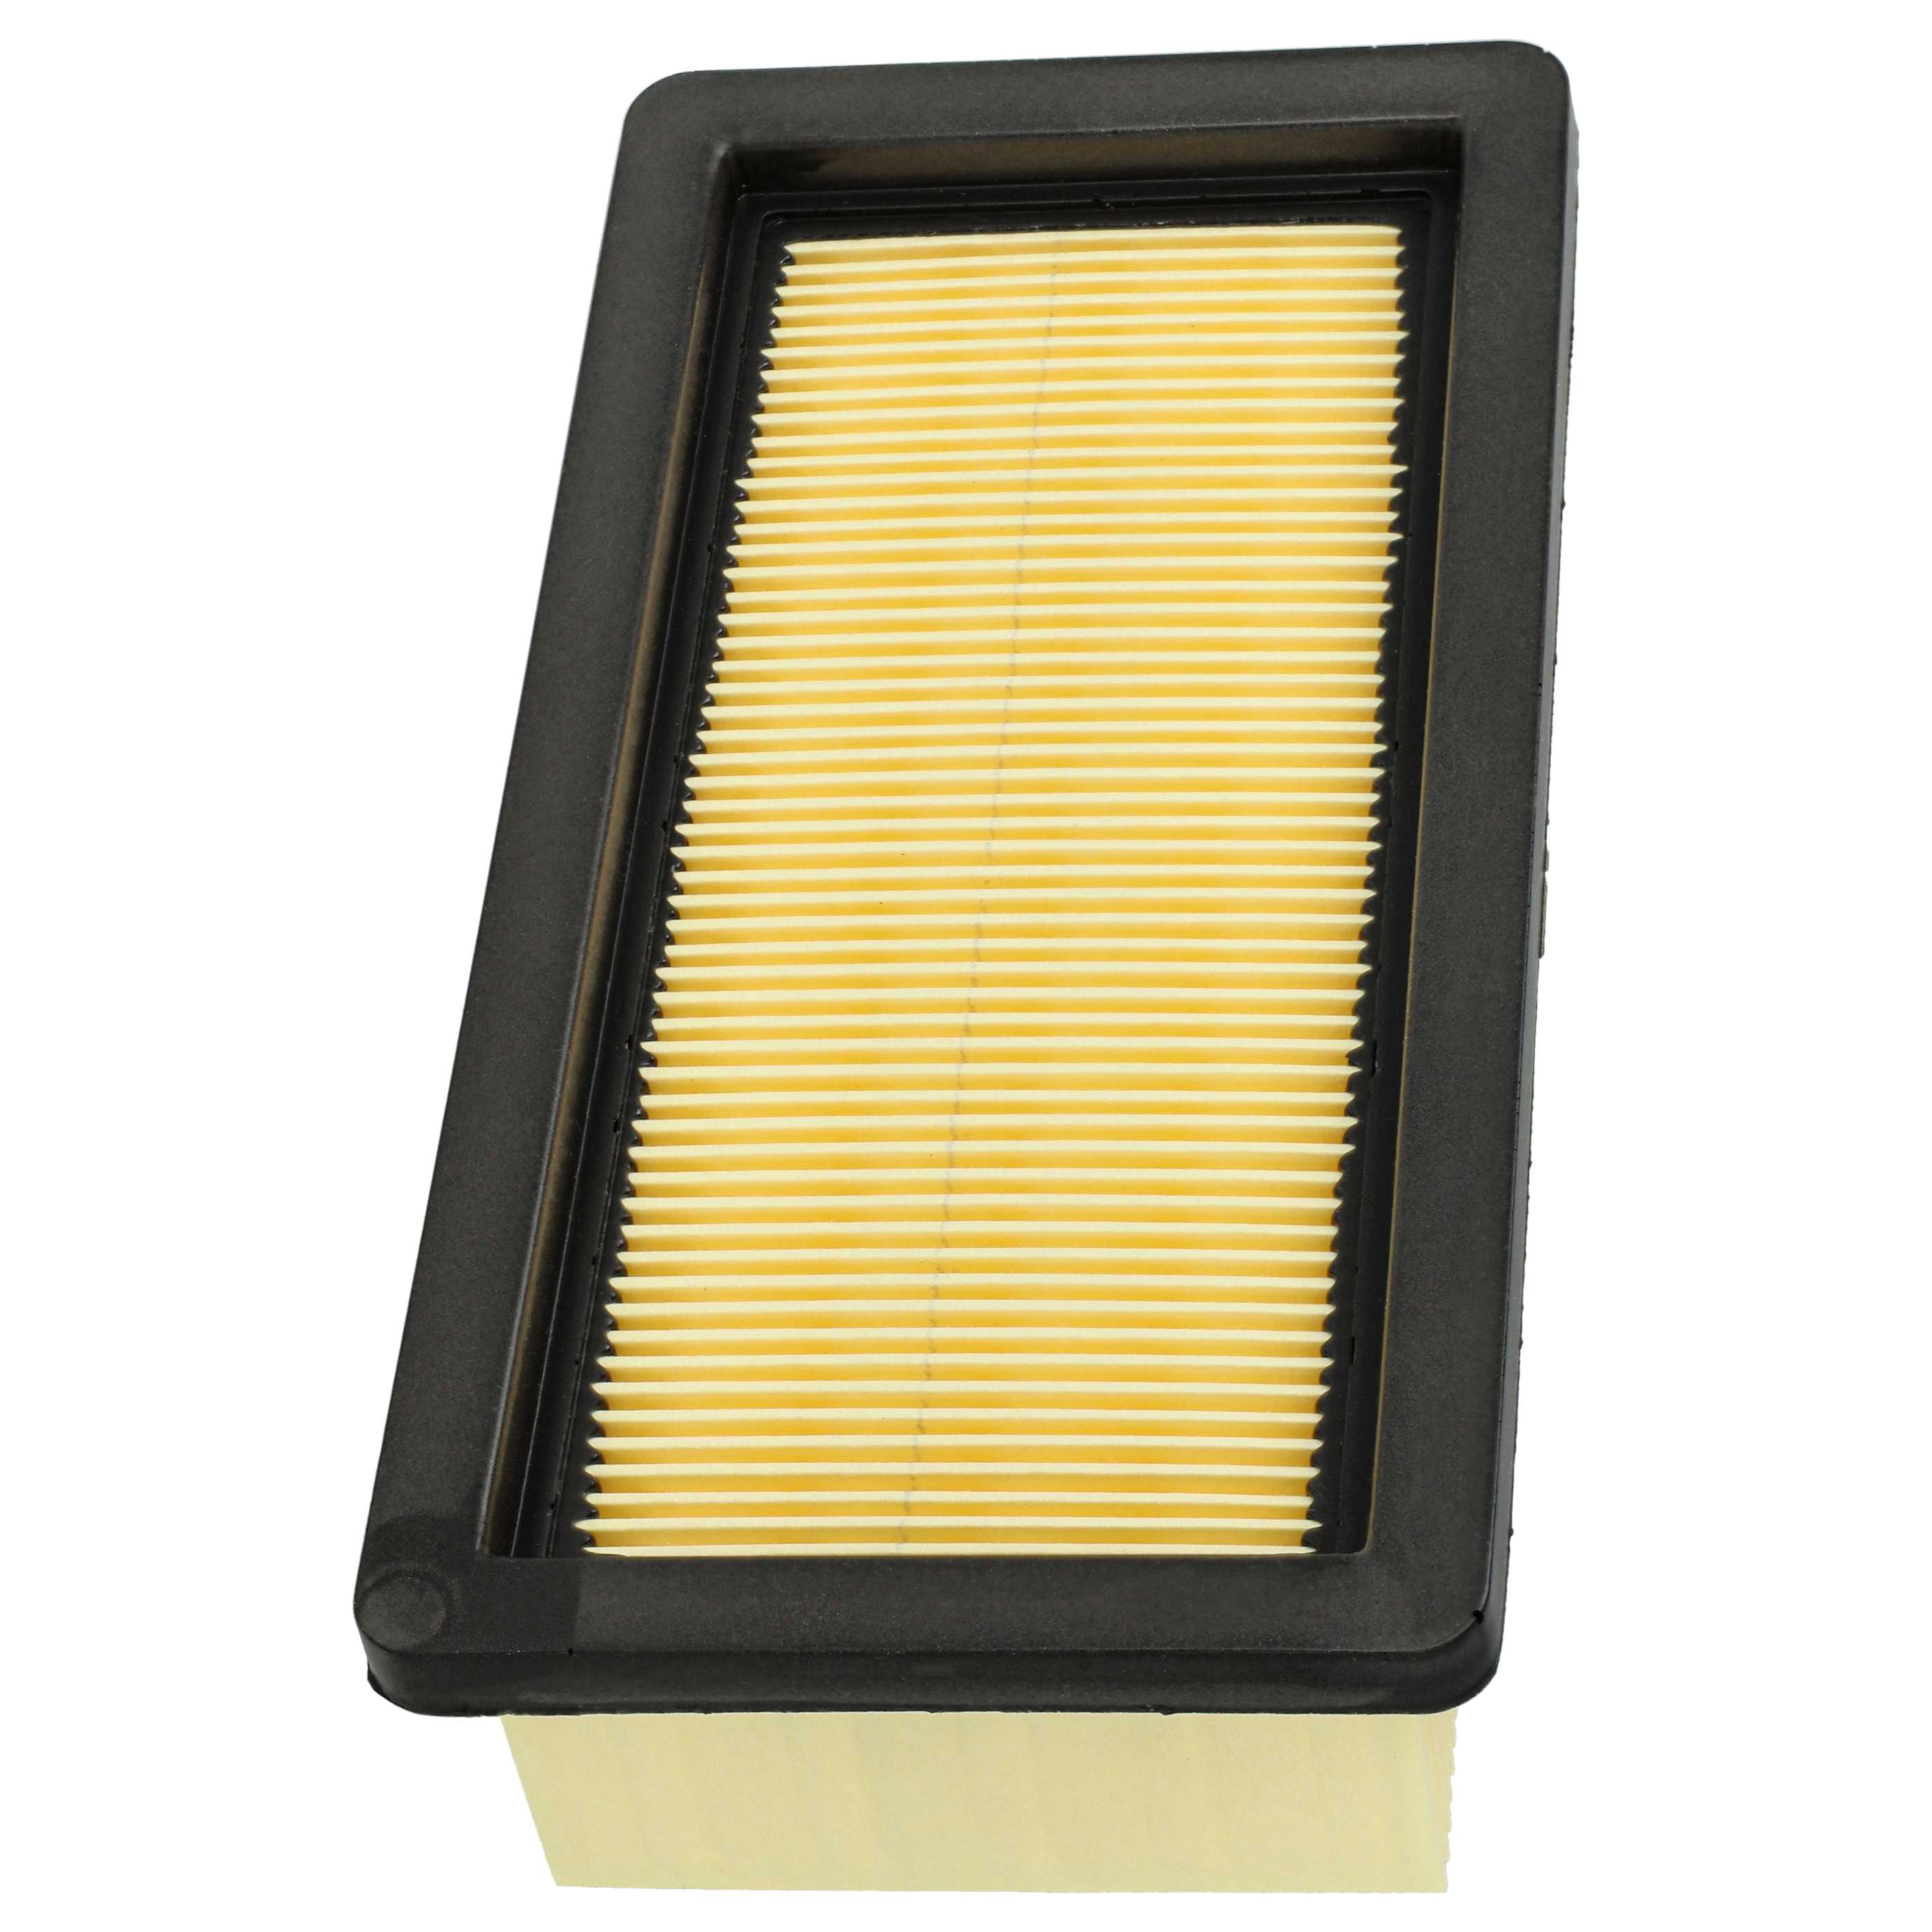 2x flat pleated filter replaces Kärcher 6.414-971.0 for KärcherVacuum Cleaner